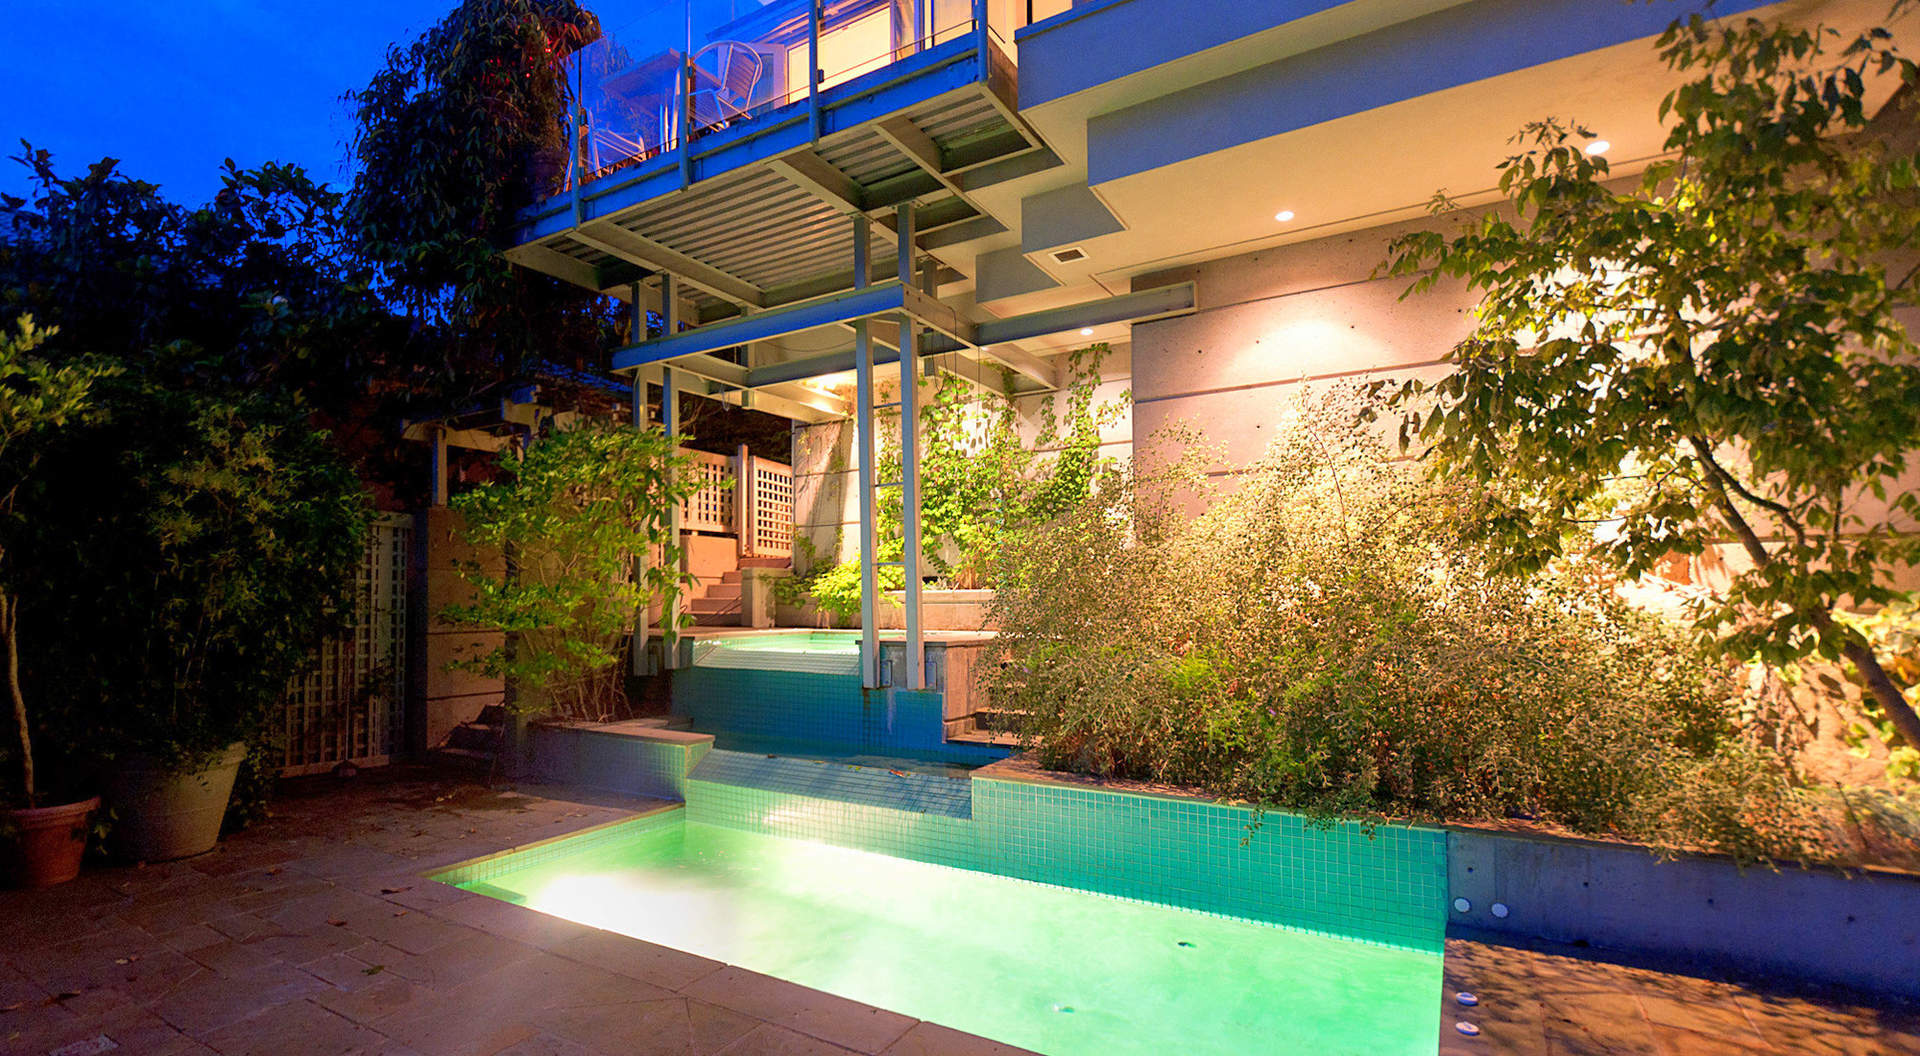 Fabulous Outdoor Plunge Pool & Hot Tub